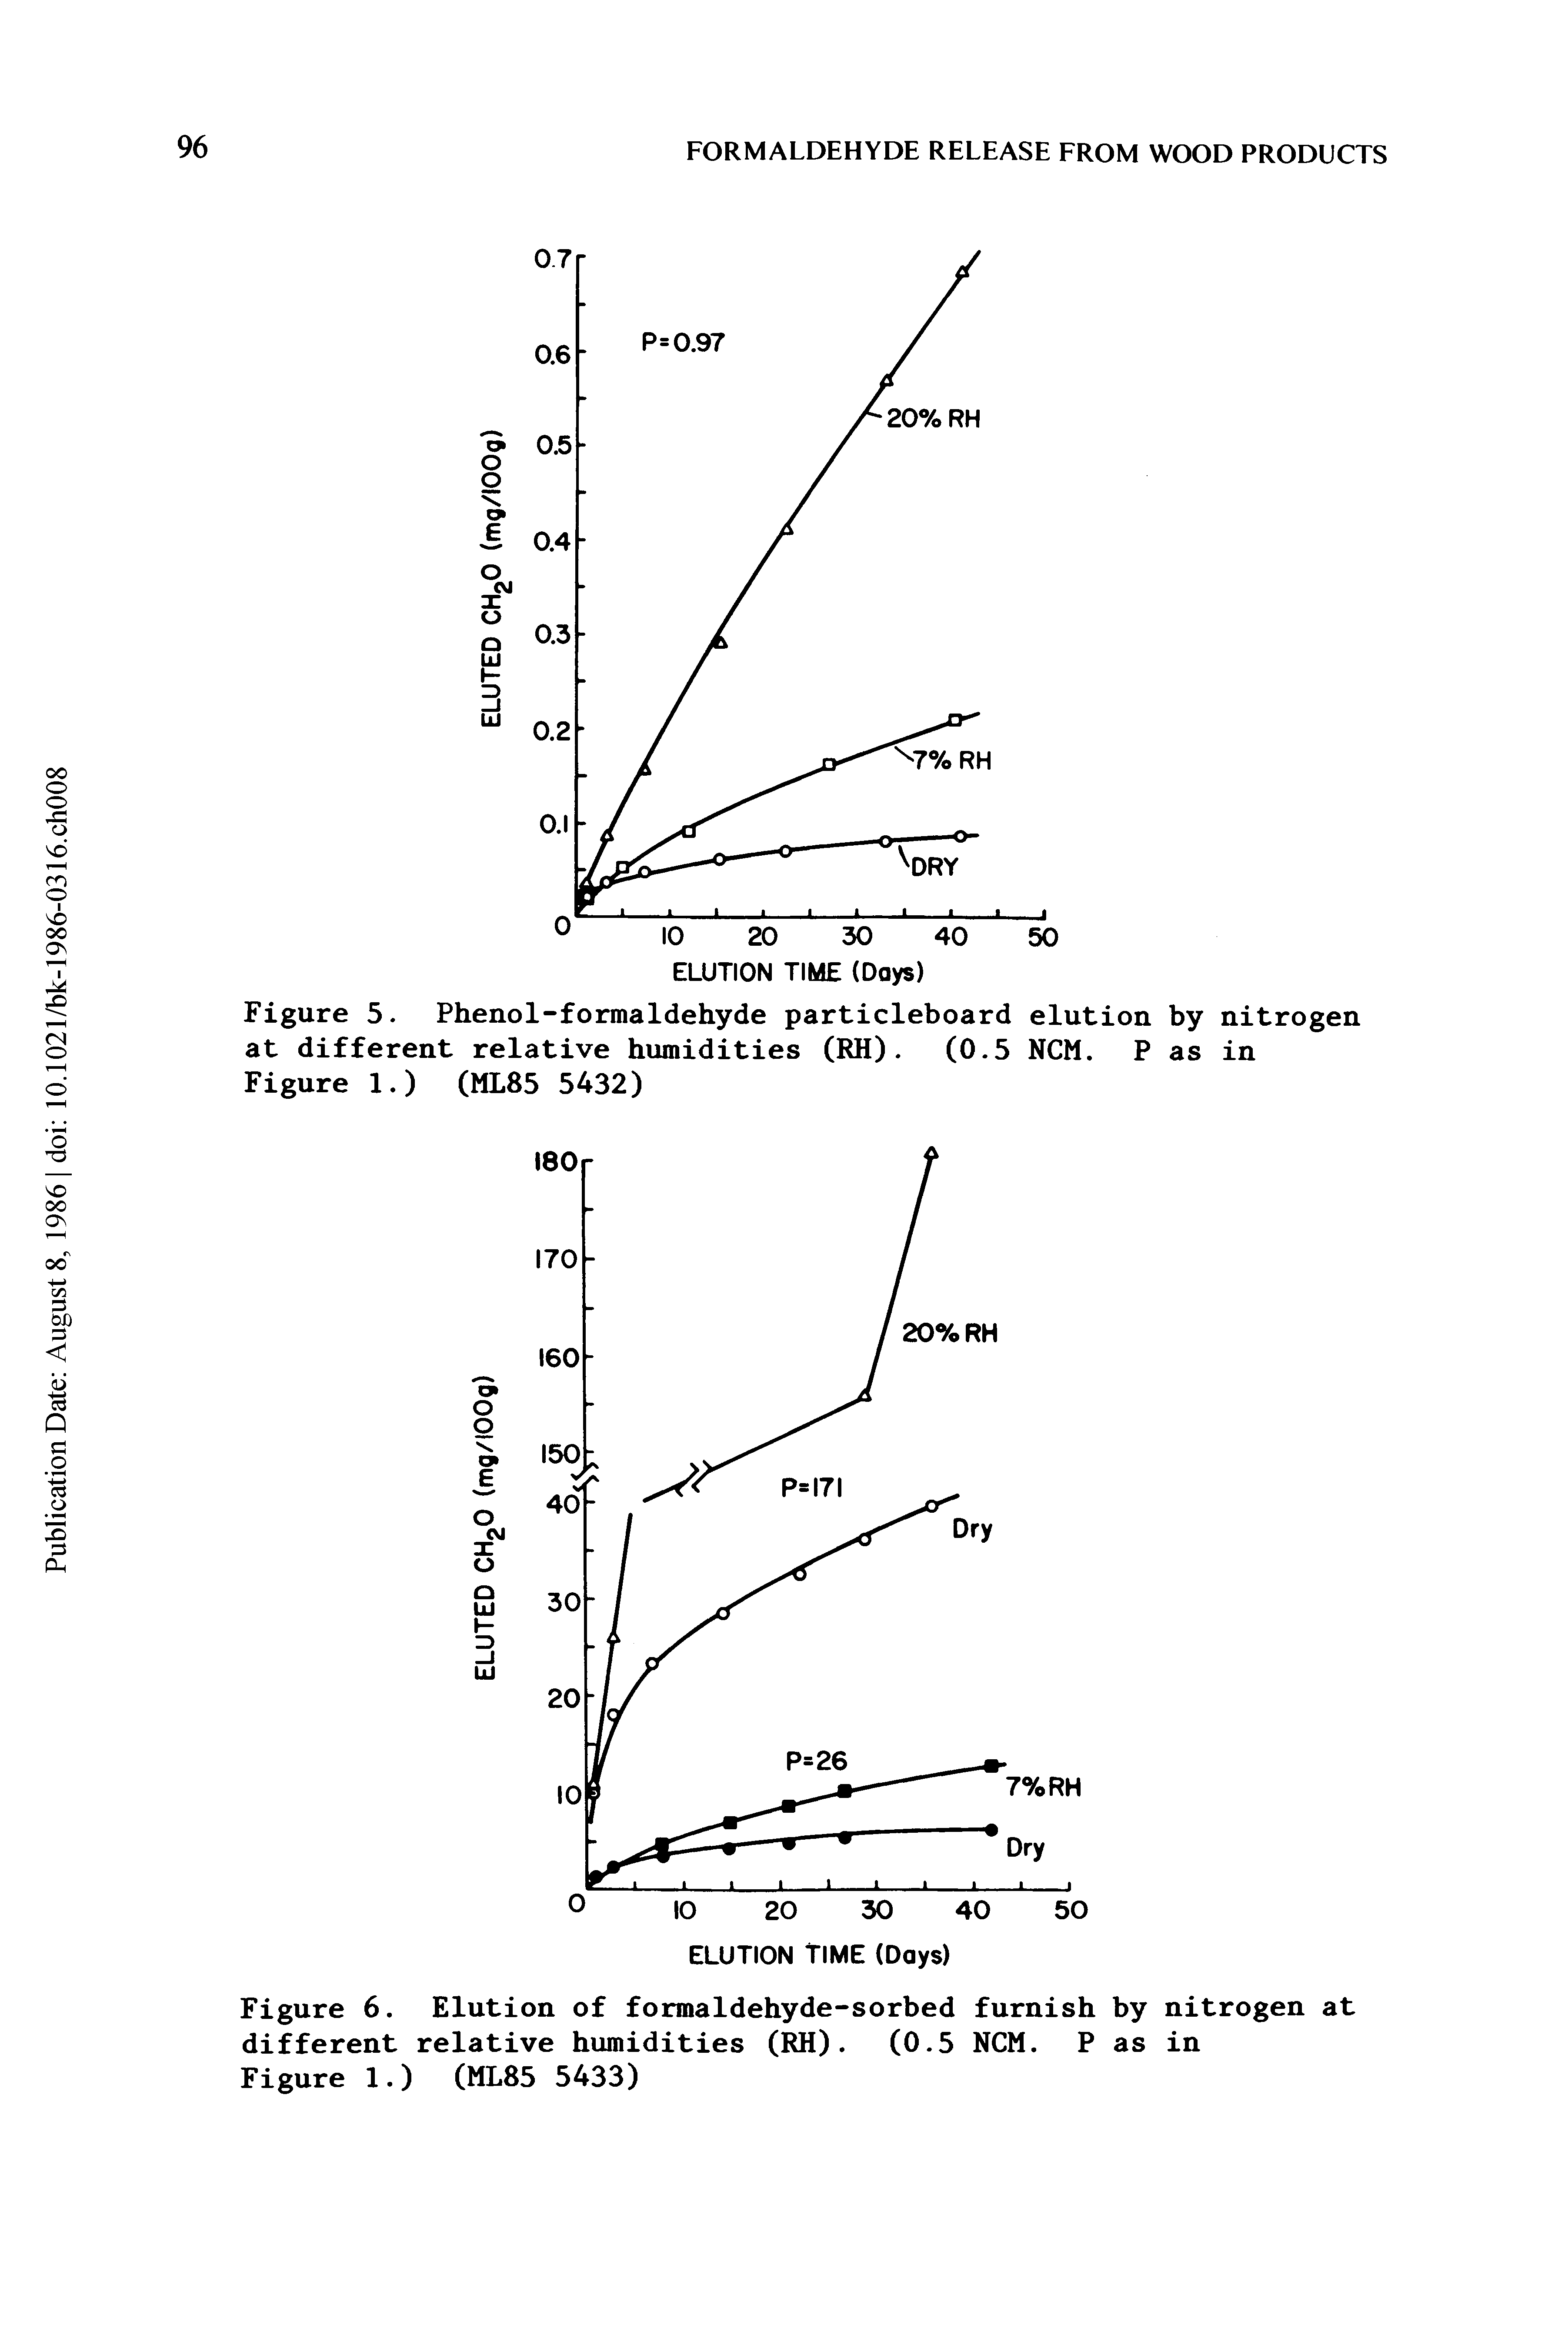 Figure 5. Phenol-formaldehyde particleboard elution by nitrogen at different relative humidities (RH). (0.5 NCM. P as in...